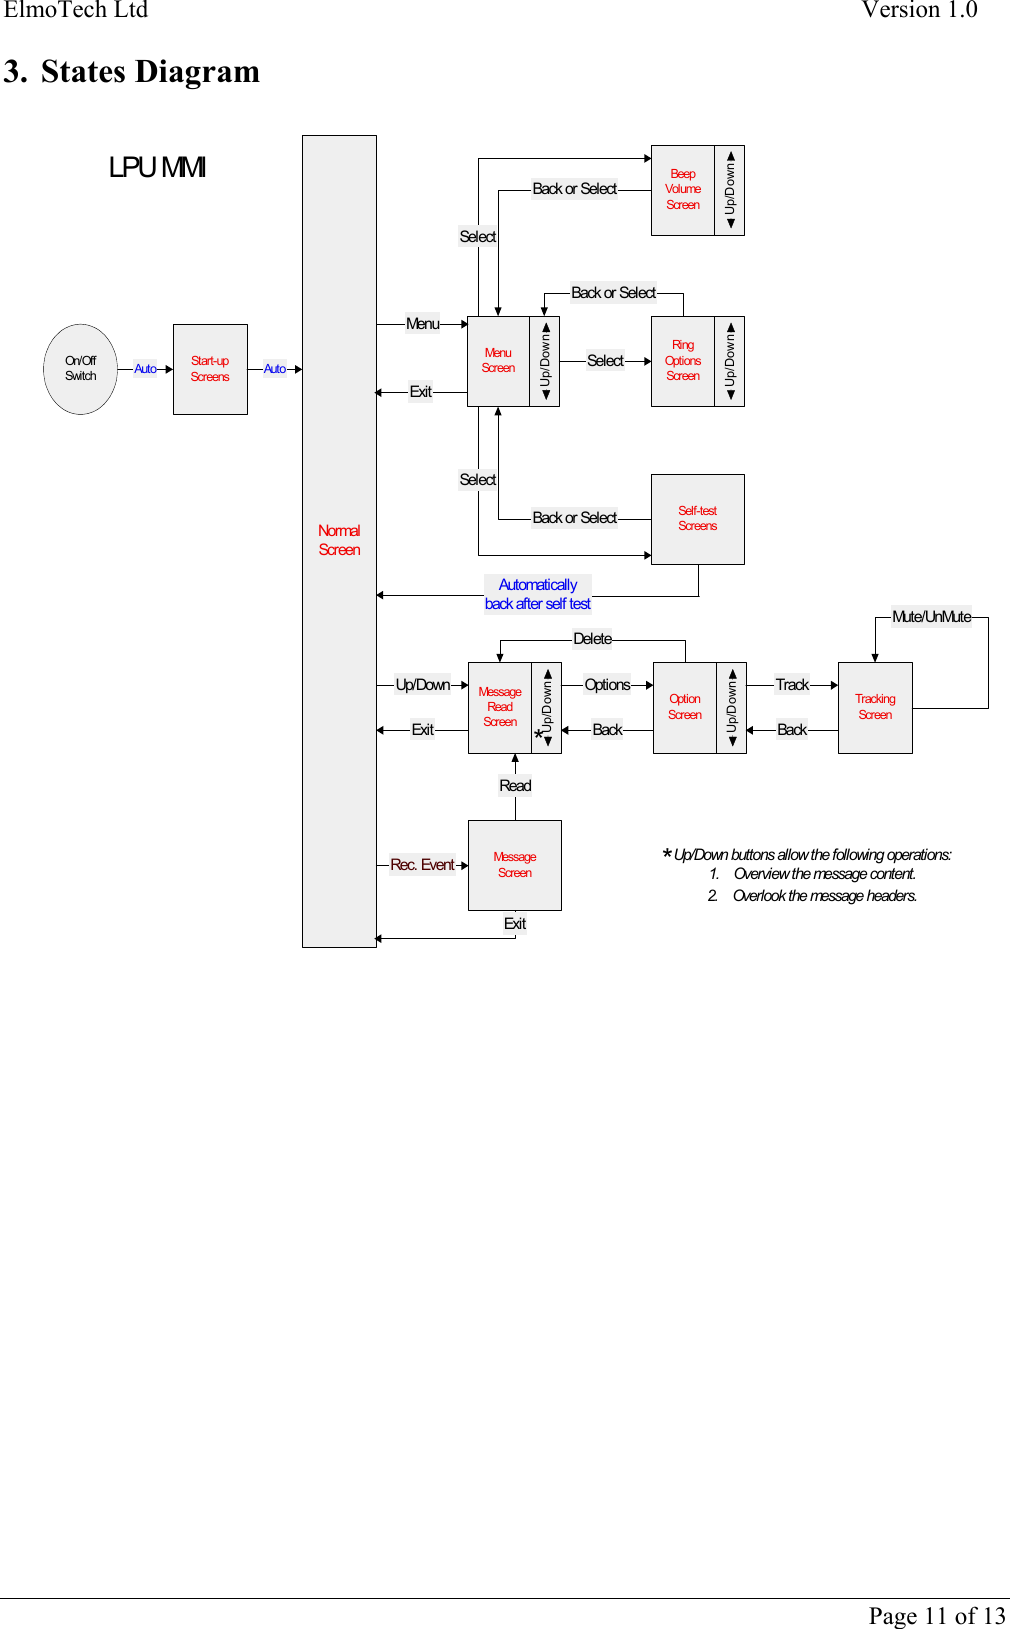 ElmoTech Ltd    Version 1.0  3. States Diagram  On/OffSwitchMenuExitUp/DownUp/DownUp/DownAuto AutoUp/DownUp/DownUp/DownExitOpti onsBackTrackBackDeleteReadMute/UnMute LPU MMI*Up/Down buttons allow the following operations:1.    Overview the message content.2.    Overlook the message headers.*ExitSelectBack or SelectSelectBack or SelectSelectBack or SelectAutomaticallyback after self test Start-upScreensNormalScreenMessageScreenTrackingScreenMenuScreenBeepVolumeScreenRingOptionsScreenMessageReadScreenOpt i onScreenRec. EventSelf-testScreens    Page 11 of 13 